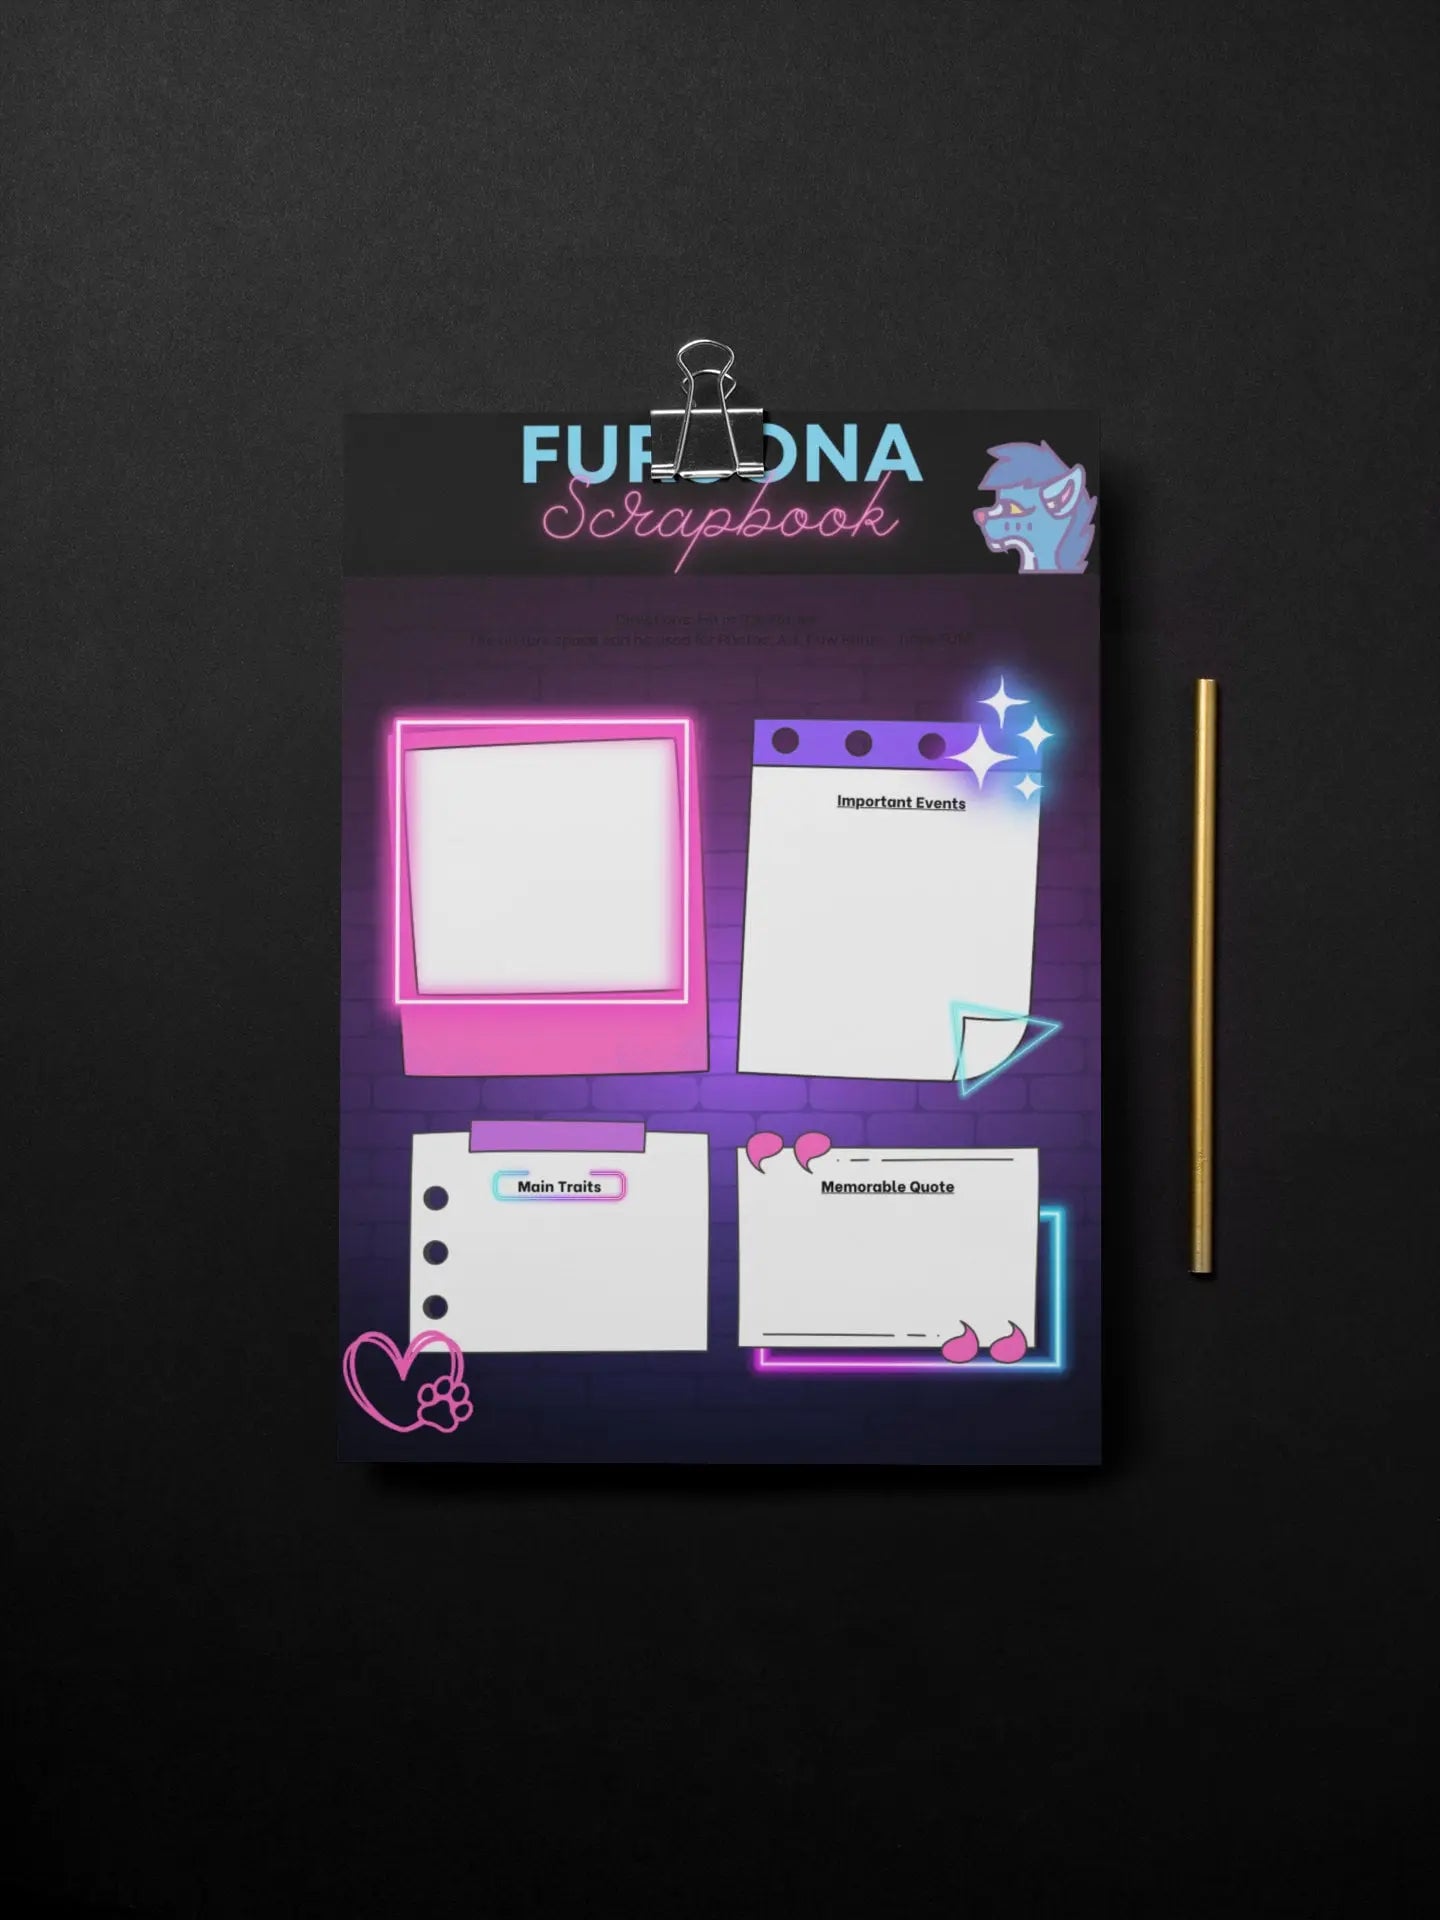 Fursona Scrapbook Page | Fursona Scrapbooking | Furry Memories Page | Furry Community Diary | Creative Gifts for Furries | Furry Art Gift My Store